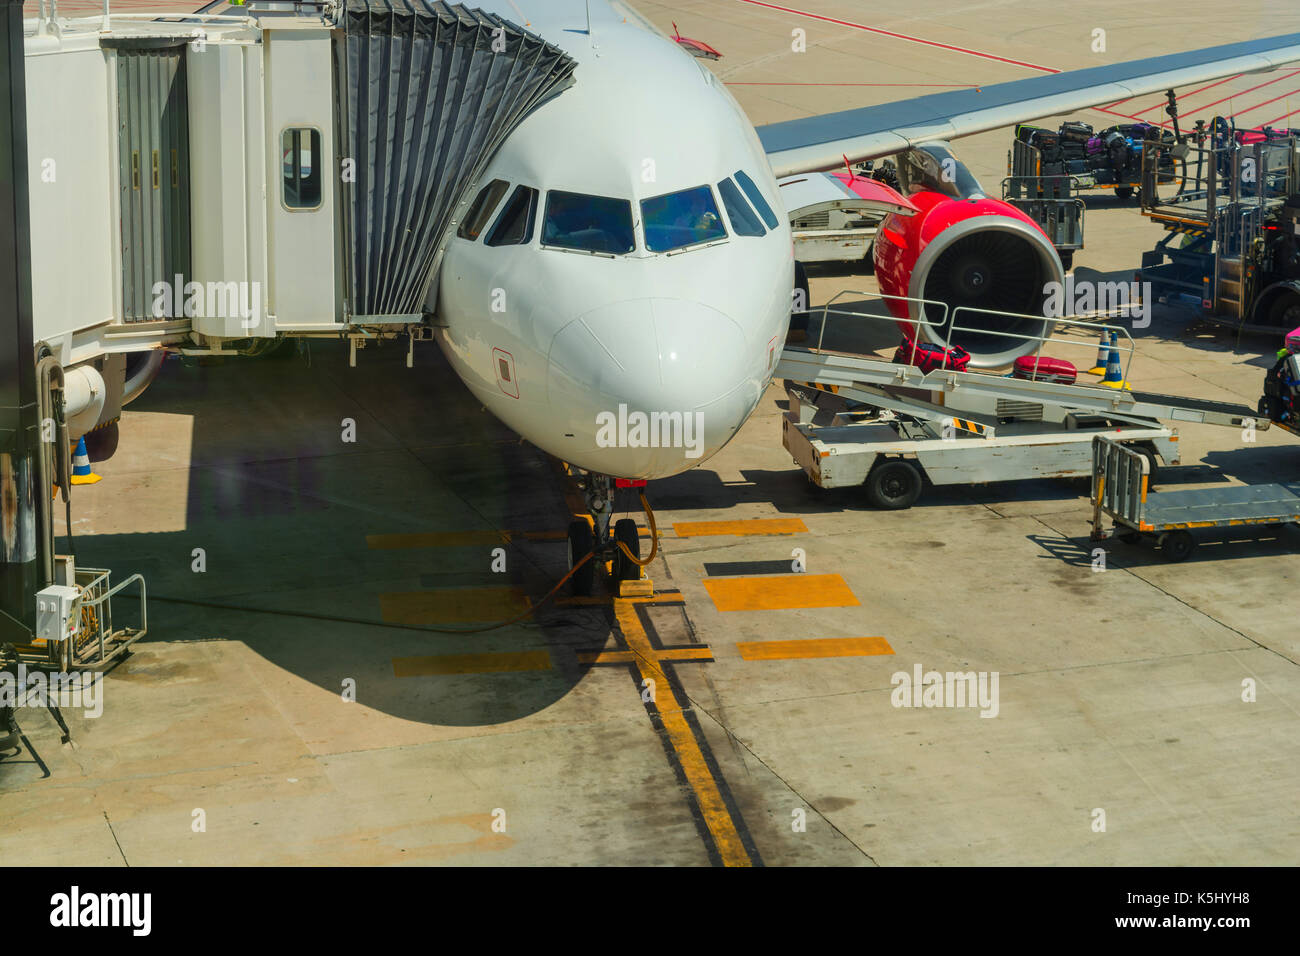 2016: Airport of Mallorca, airplane in departure area during loading and refueling ready for departure. Stock Photo